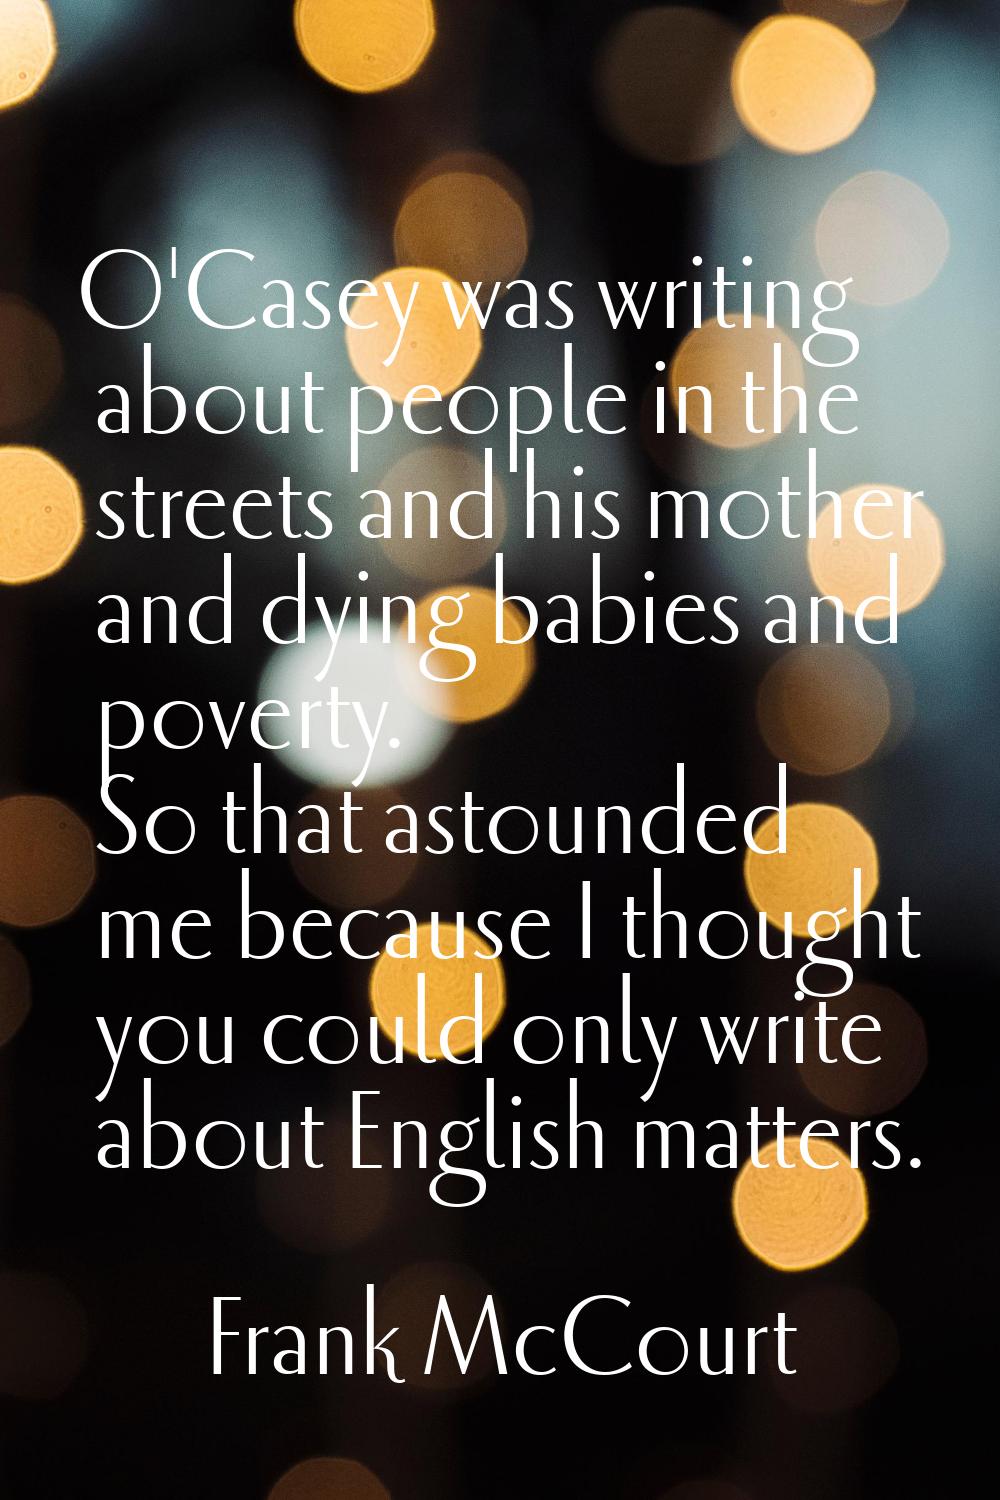 O'Casey was writing about people in the streets and his mother and dying babies and poverty. So tha